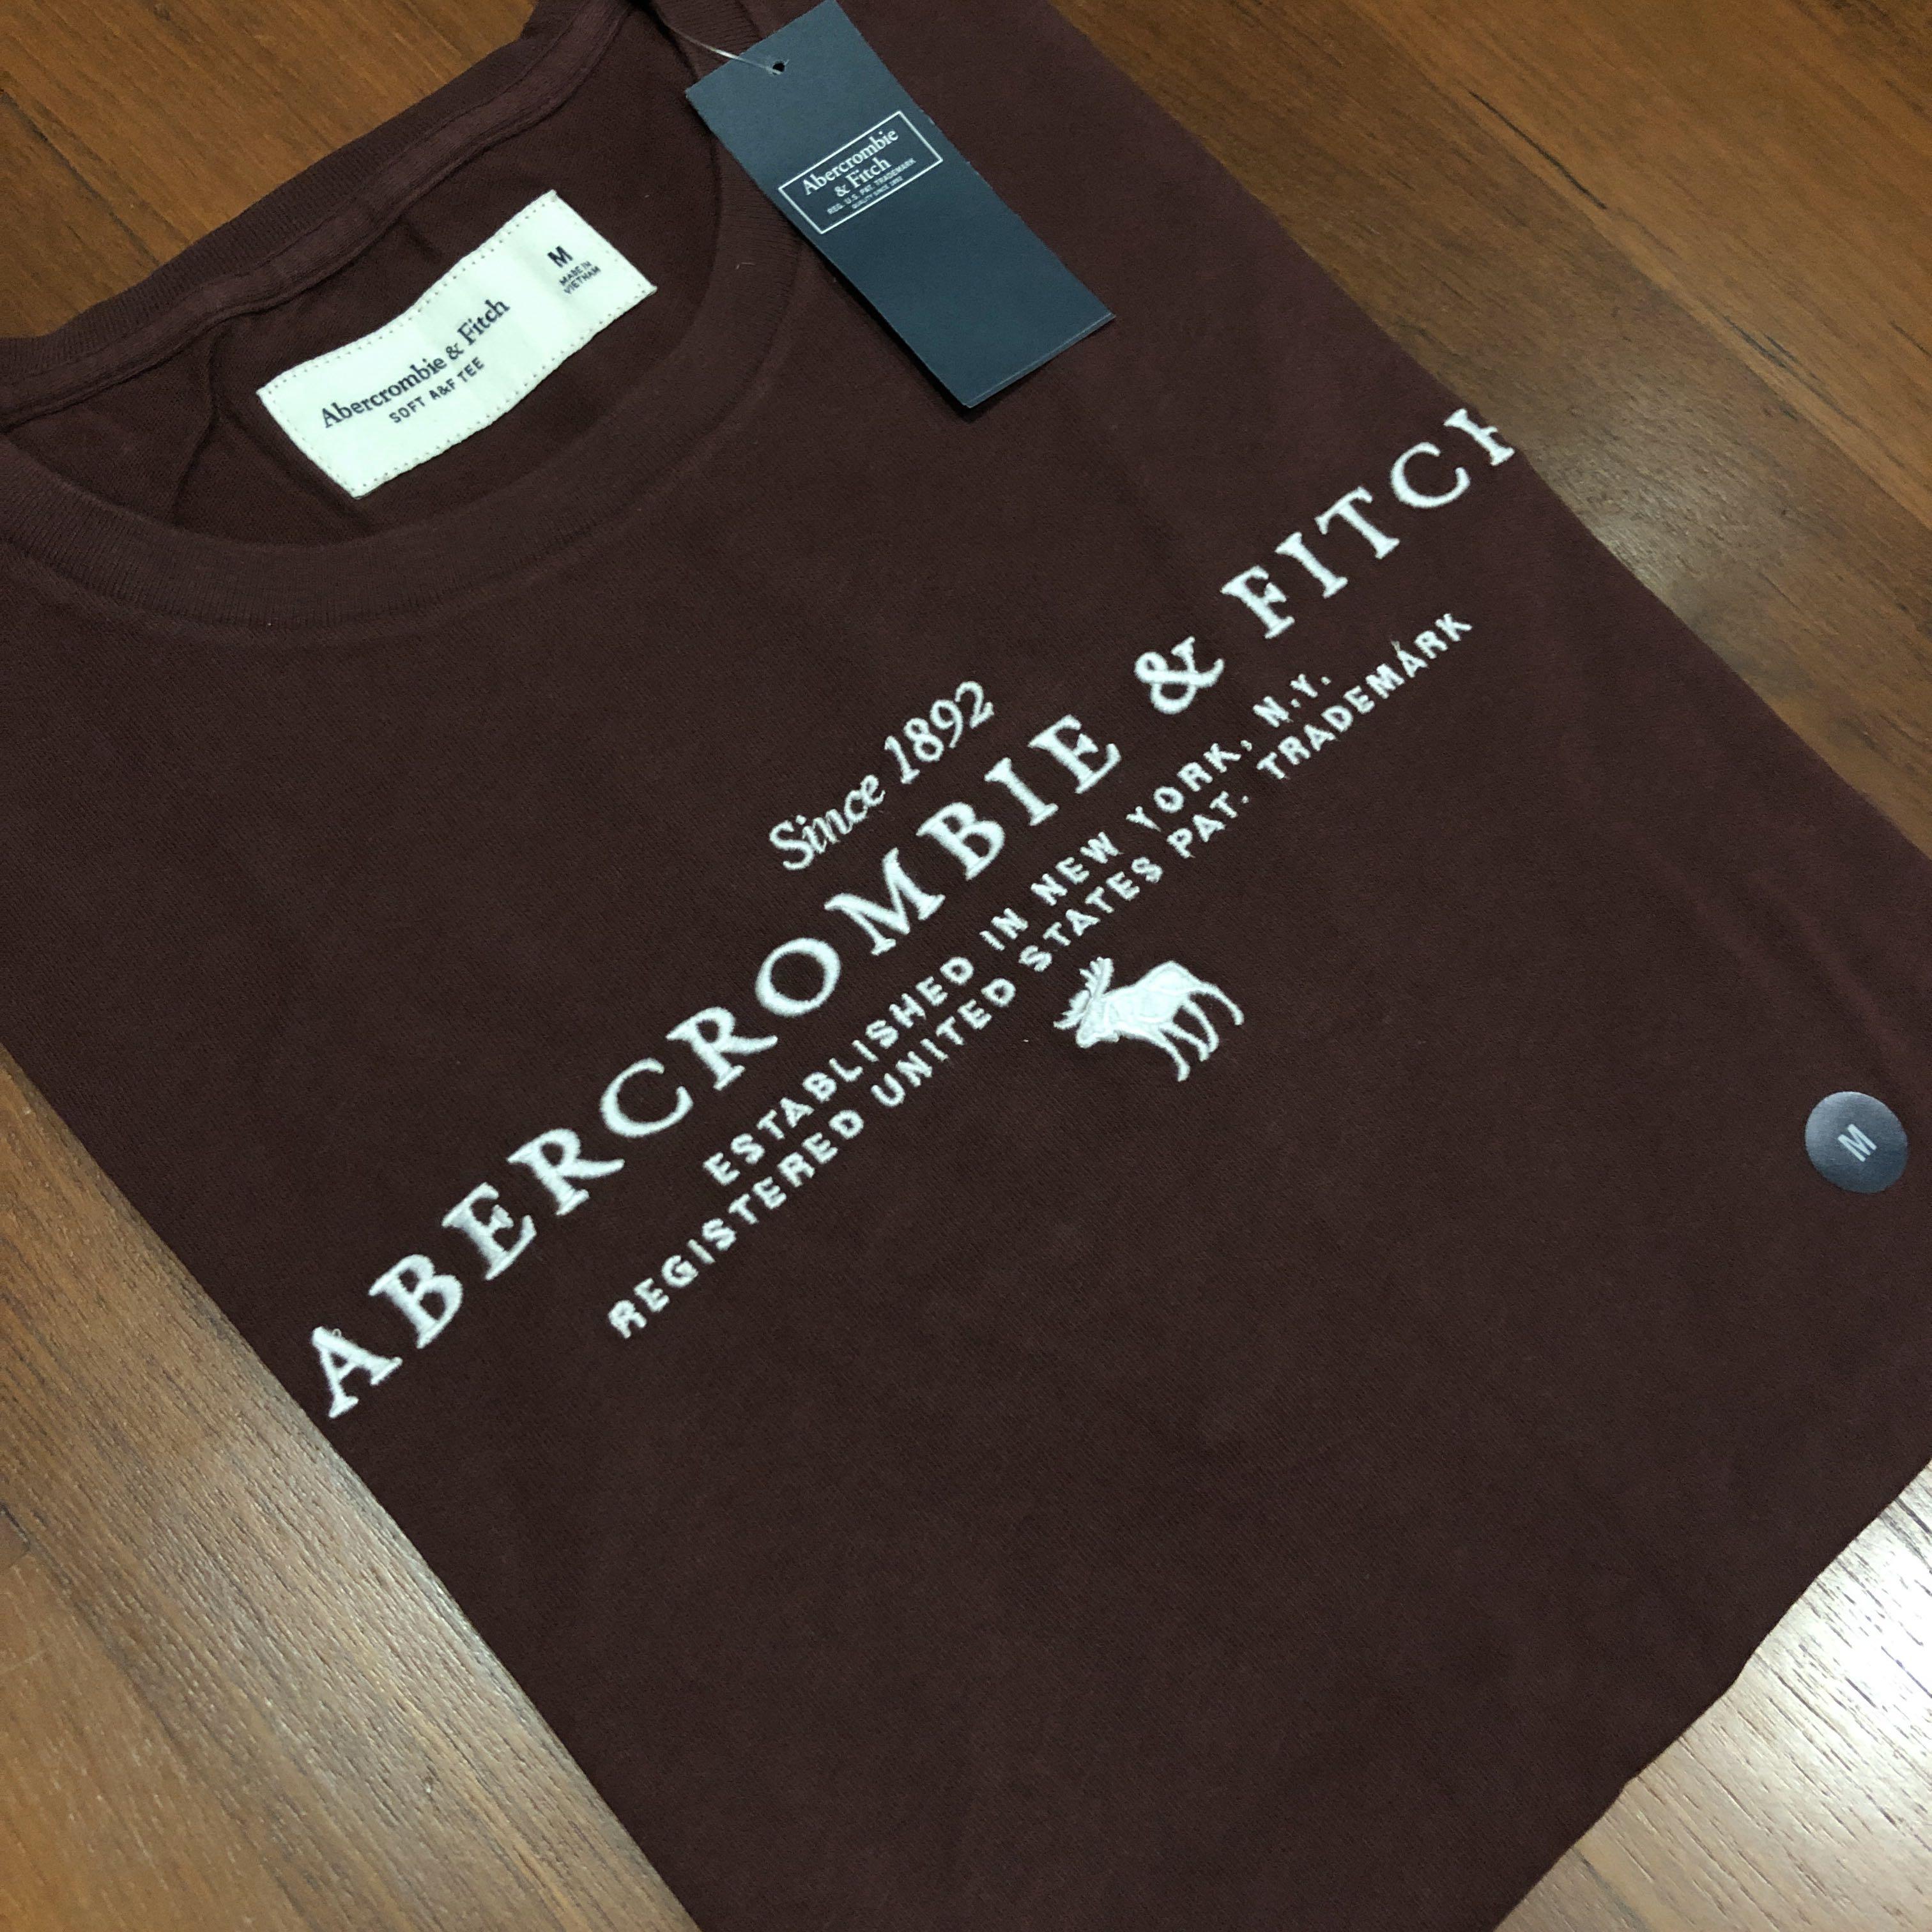 hollister abercrombie and fitch